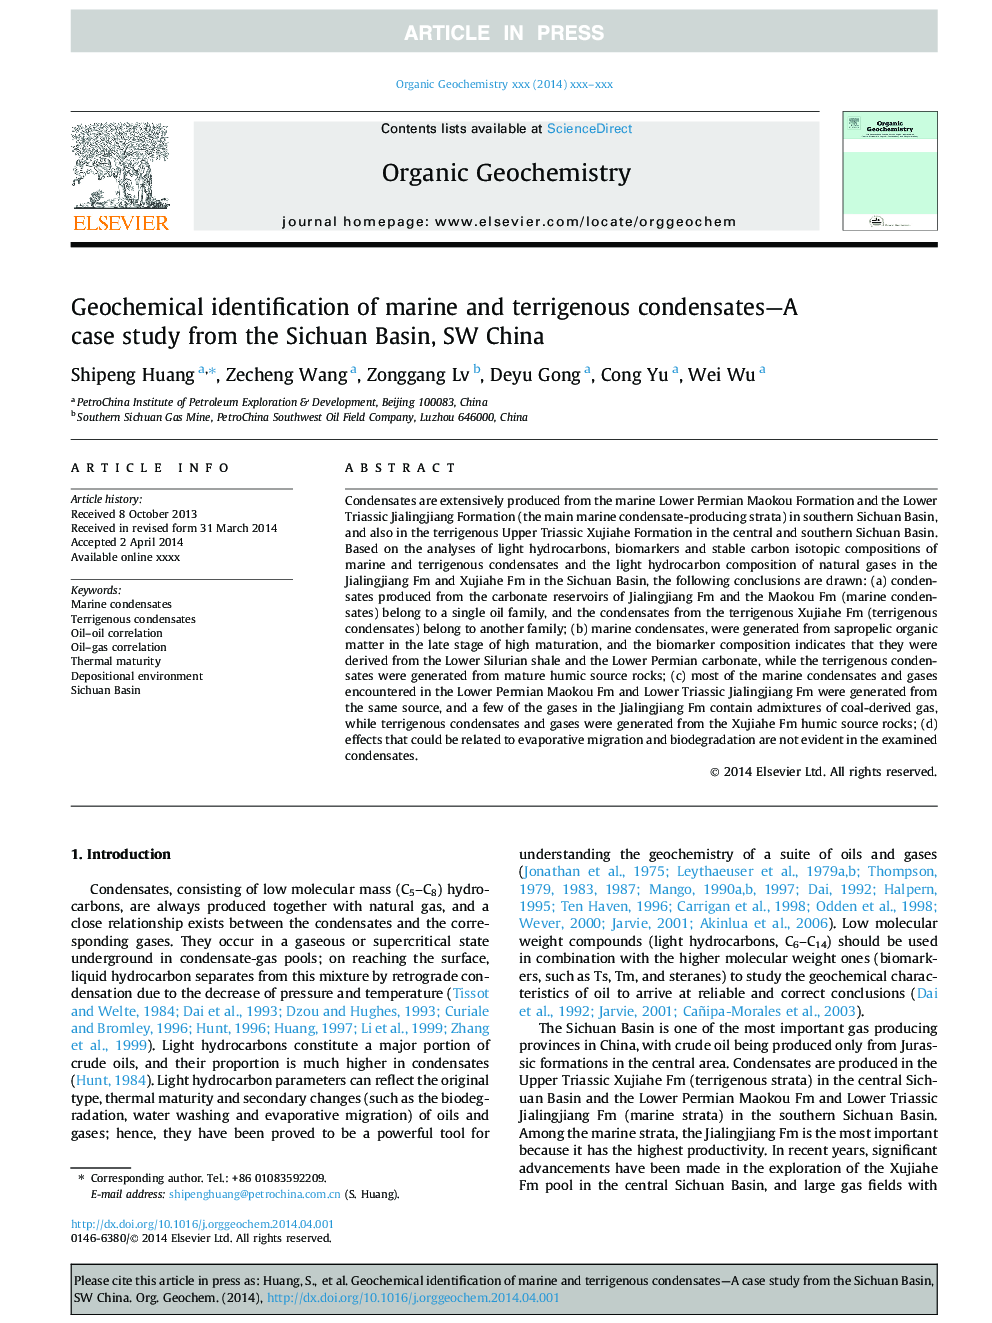 Geochemical identification of marine and terrigenous condensates-A case study from the Sichuan Basin, SW China